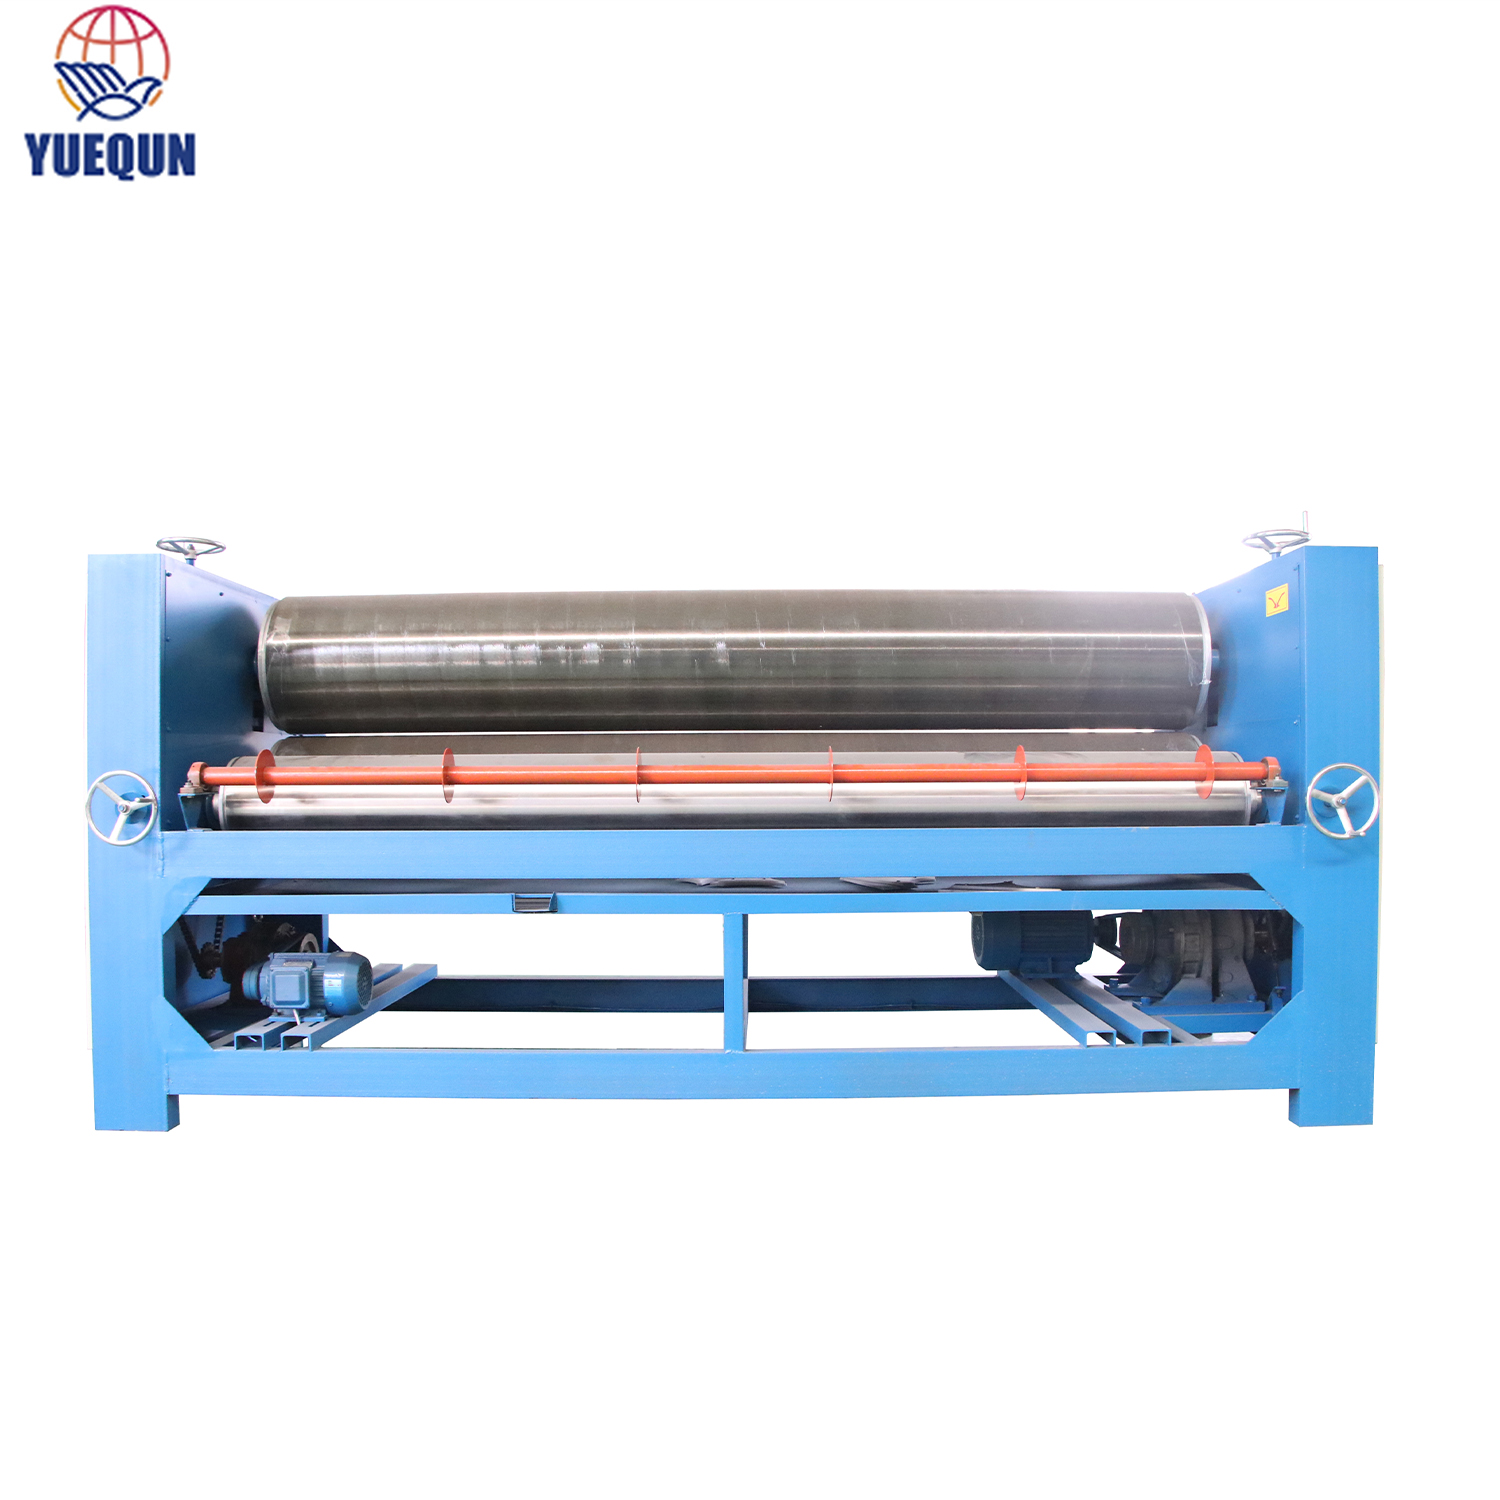 8ft Double Sided Wood Glue spreader roller machine for plywood